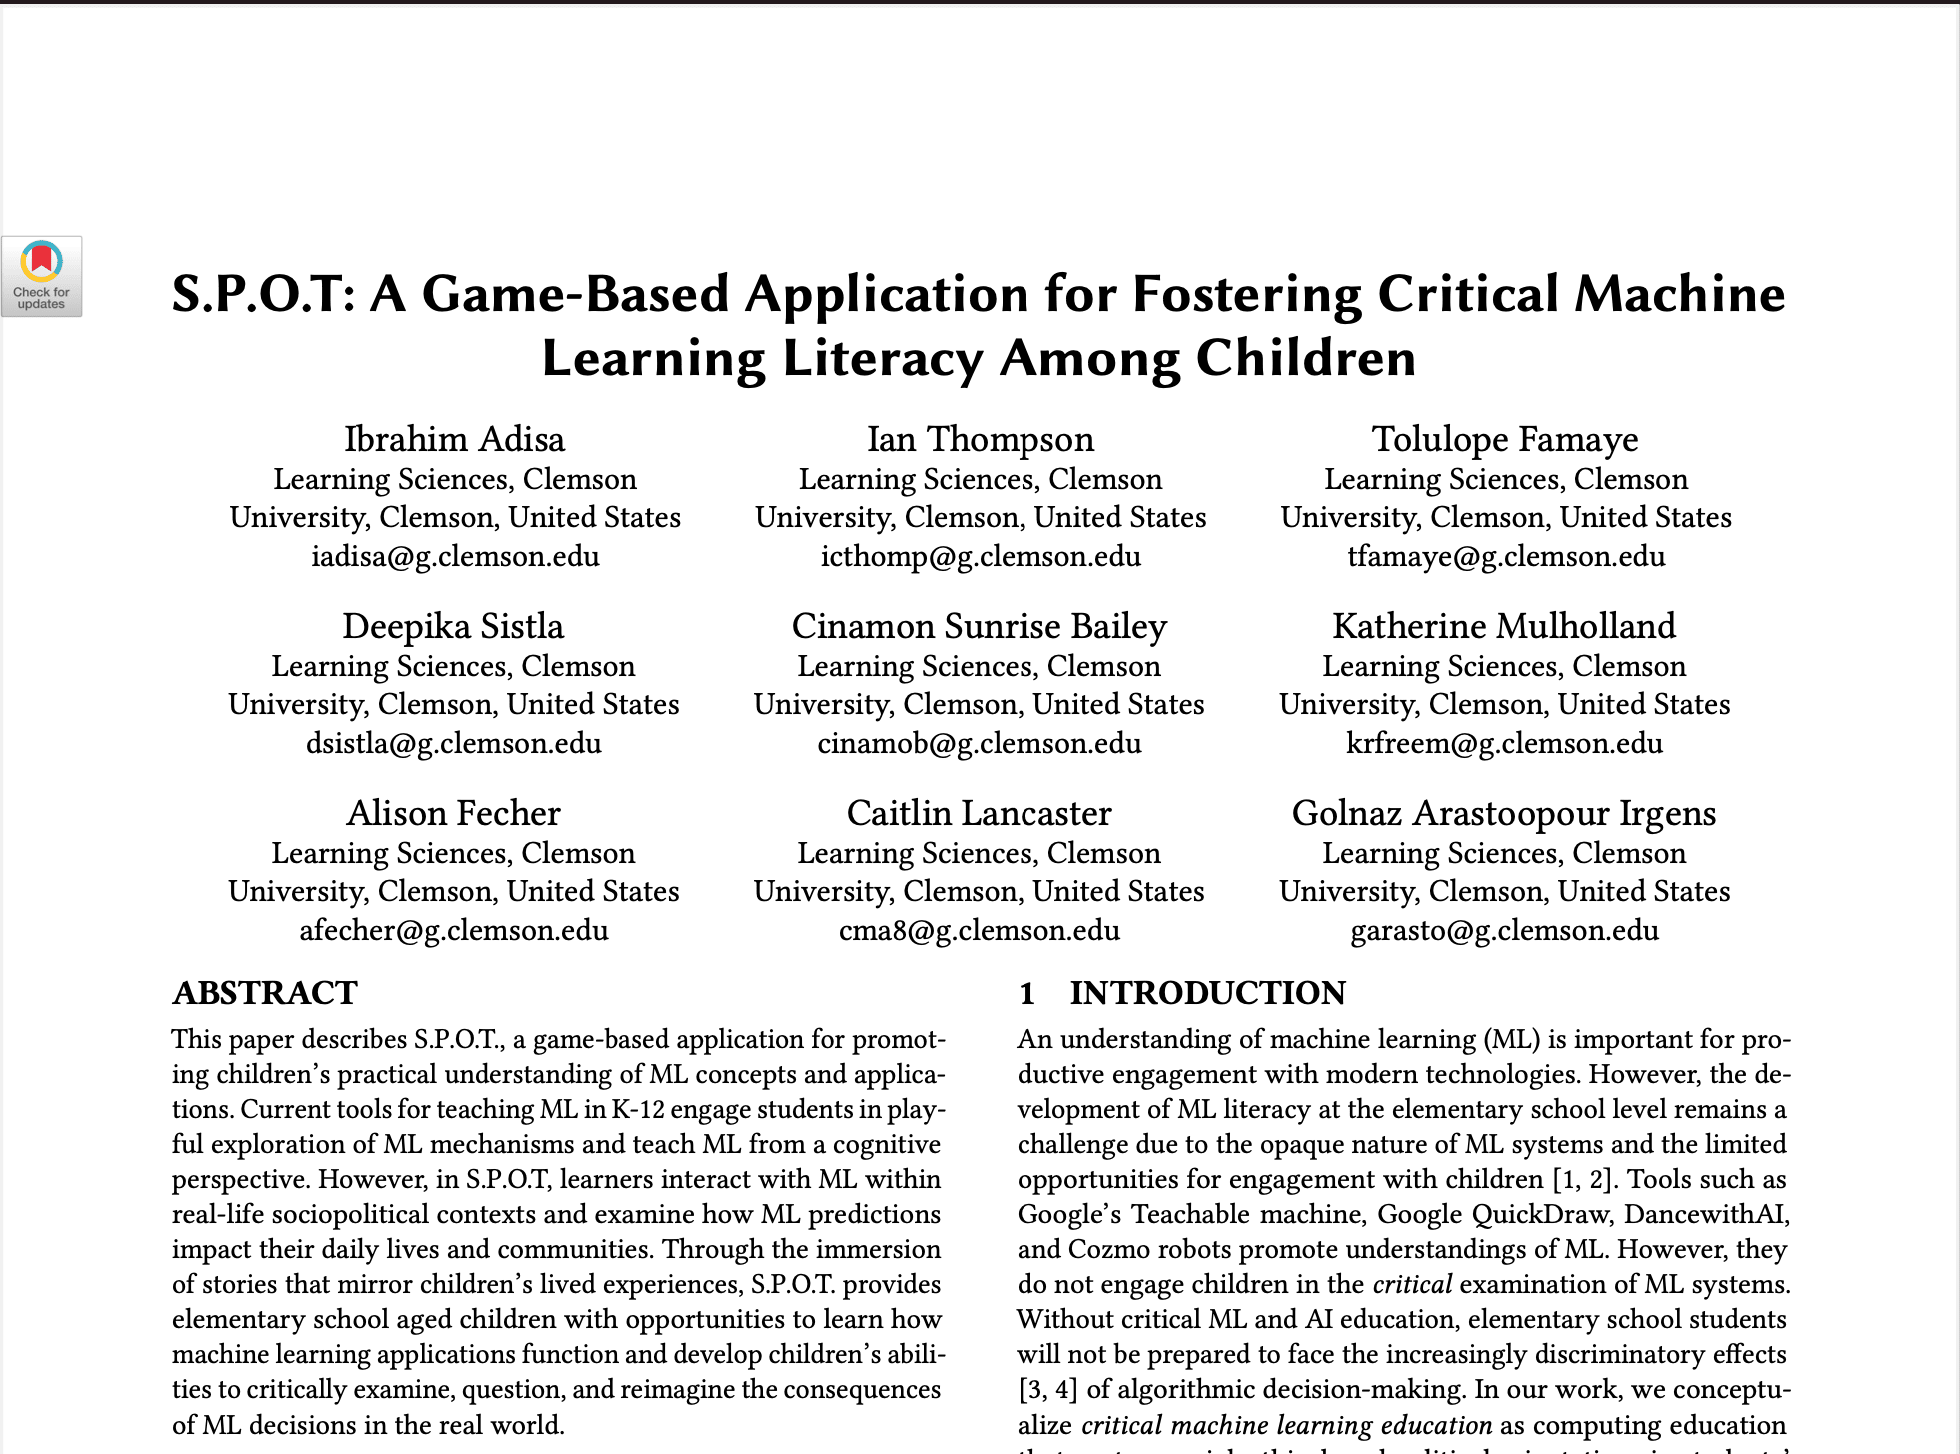 S.P.O.T: A Game-Based Application for Fostering Critical Machine Learning Literacy Among Children